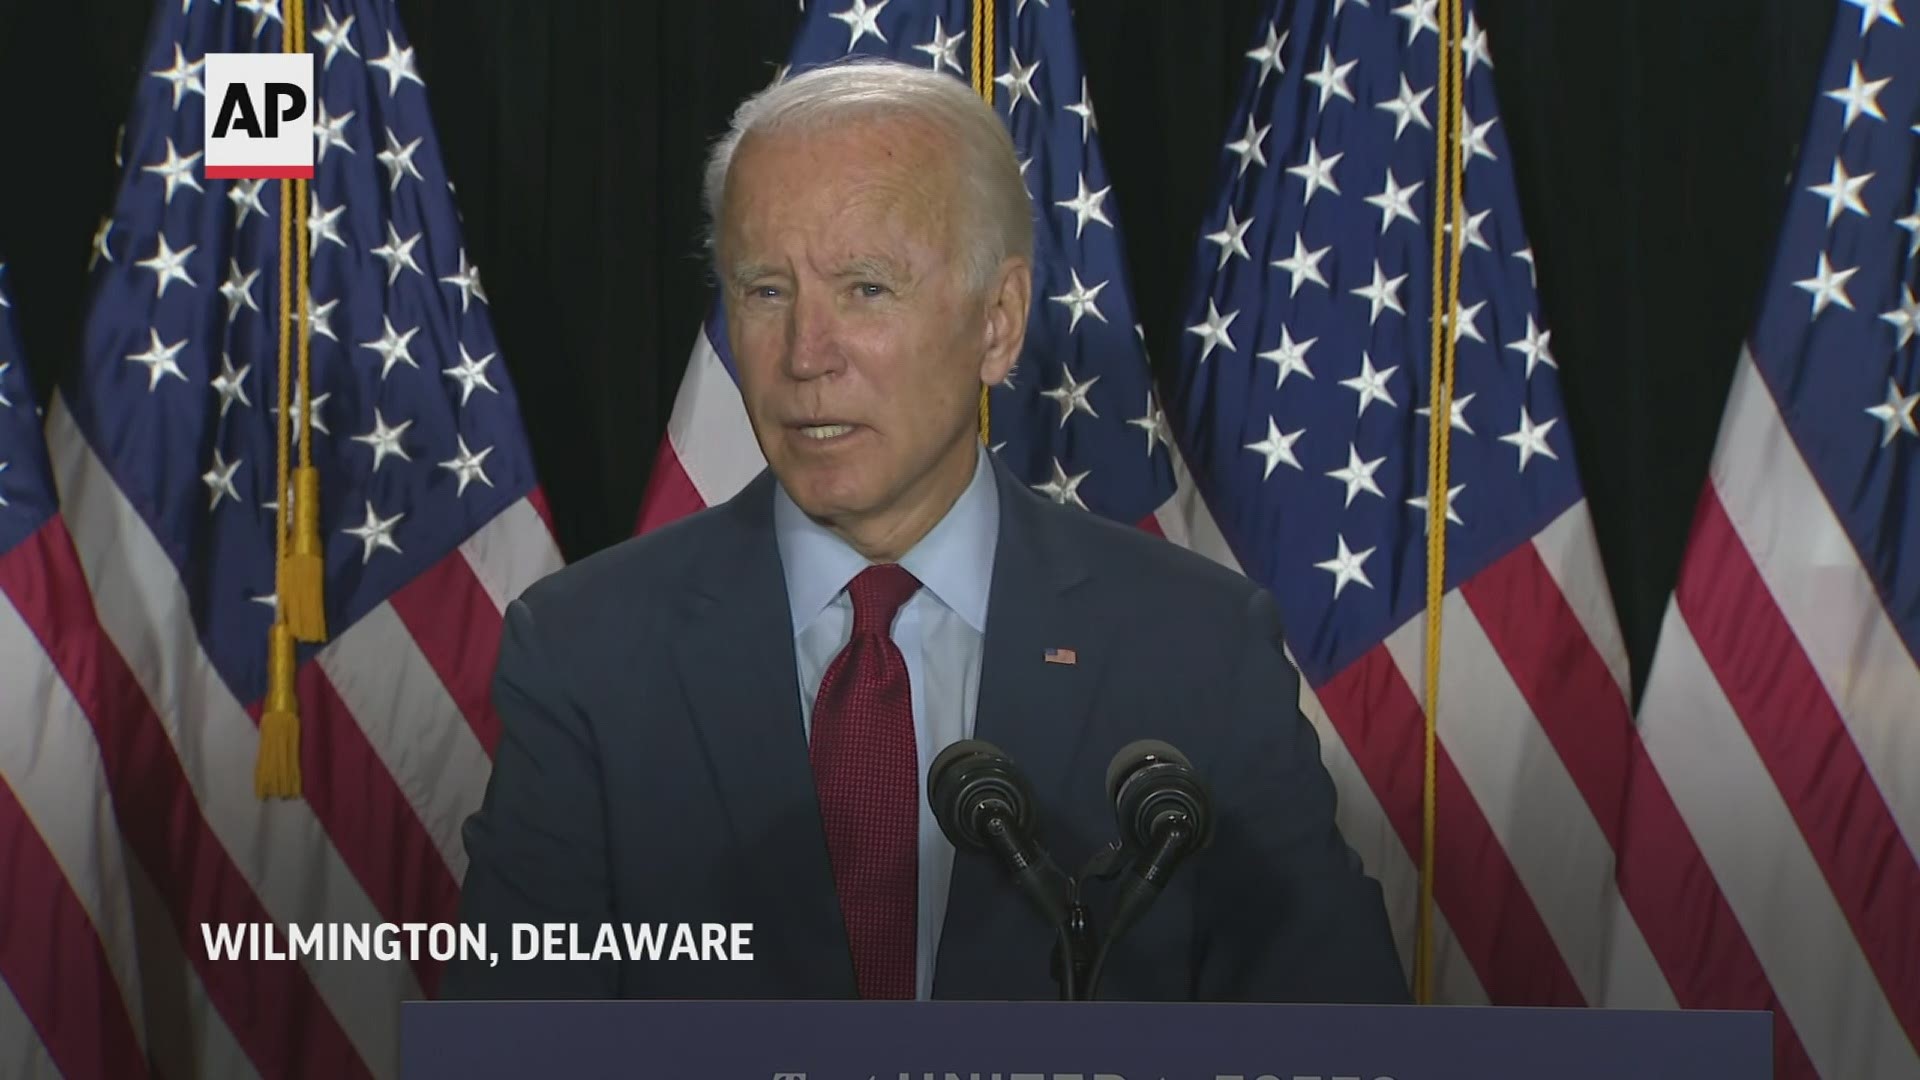 Democratic presidential nominee Joe Biden called on all governors to mandate mask use, citing health experts who say it could save 40,000 lives.